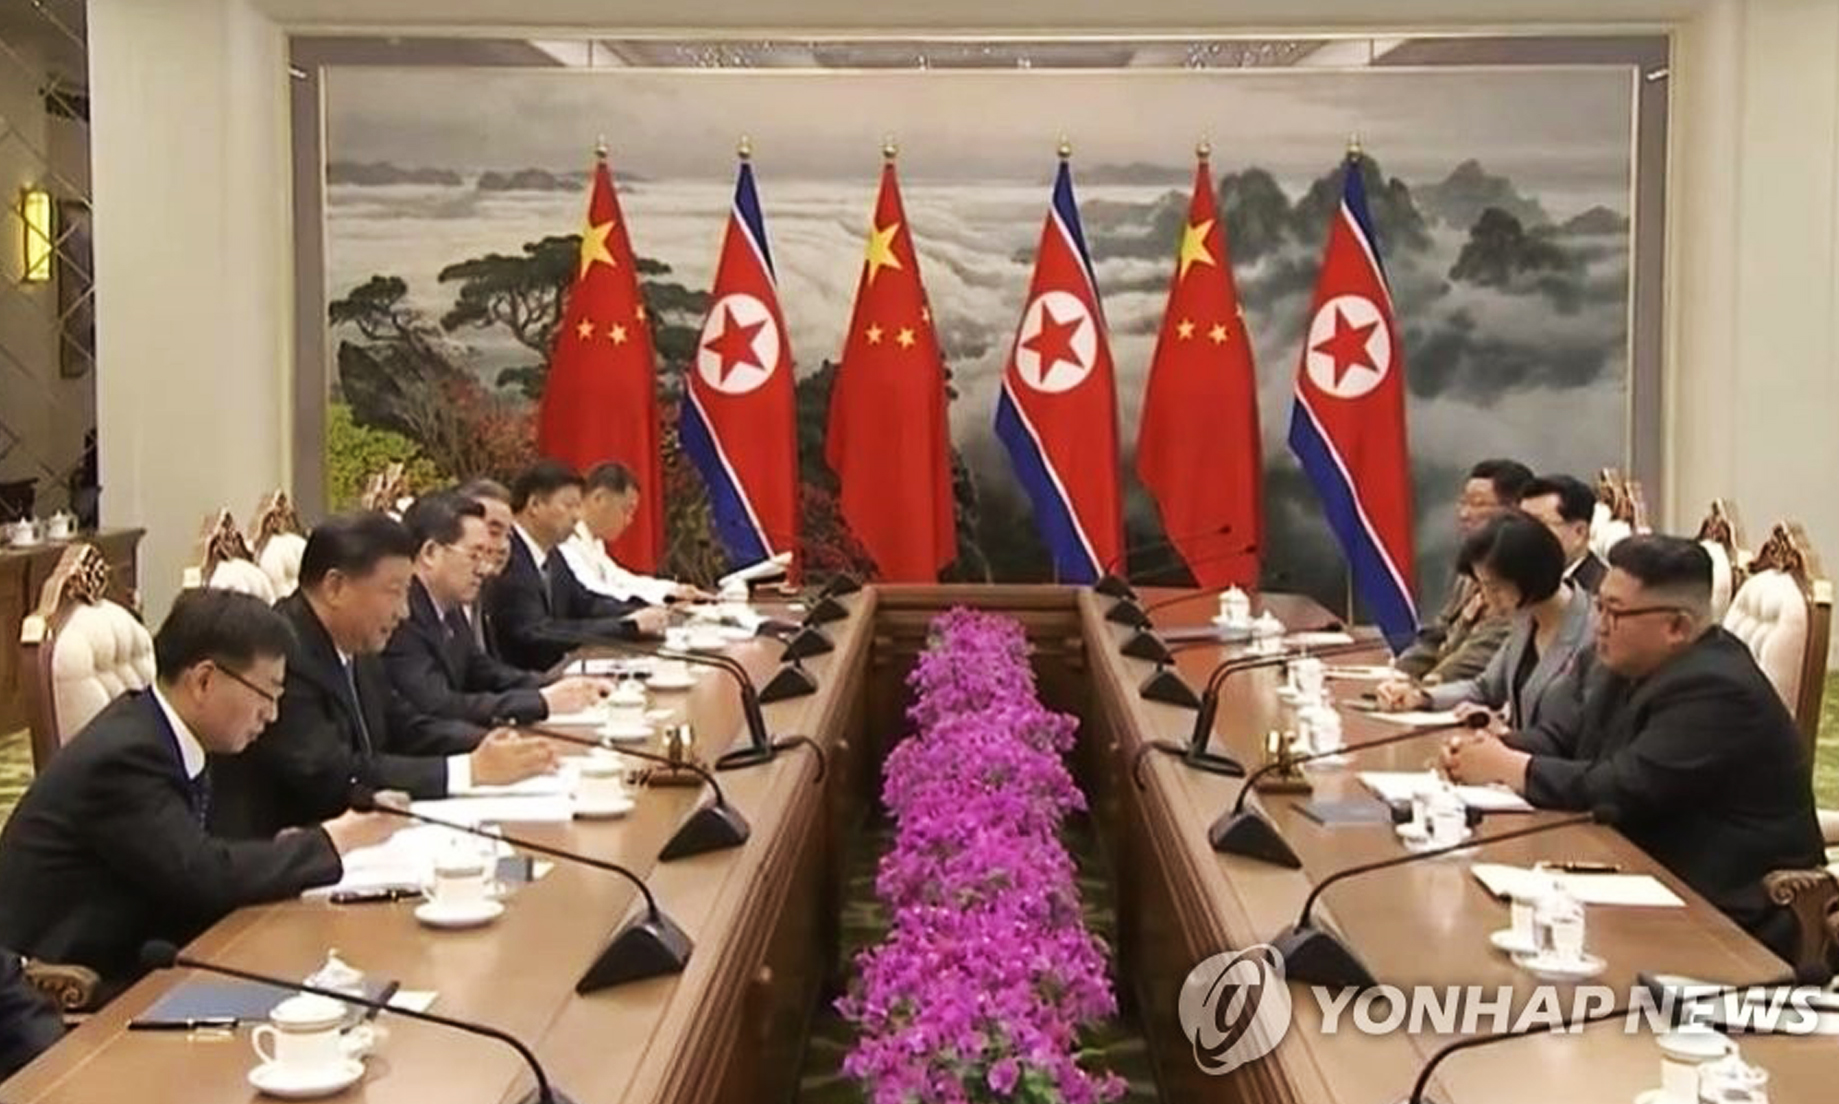 Kim voices desire to continue talks to resolve nuke issue